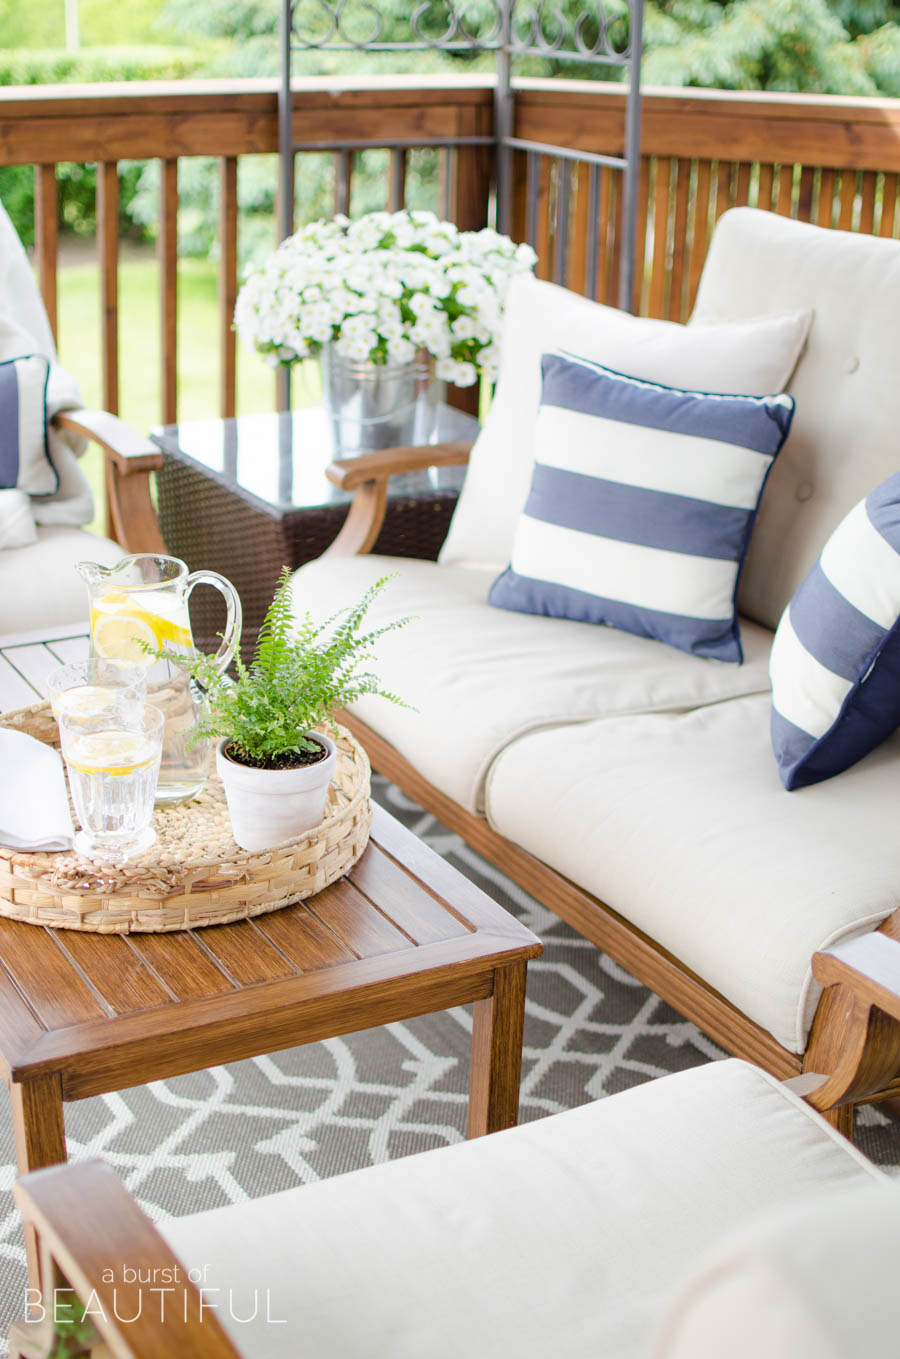 Ideas for creating an outdoor living space